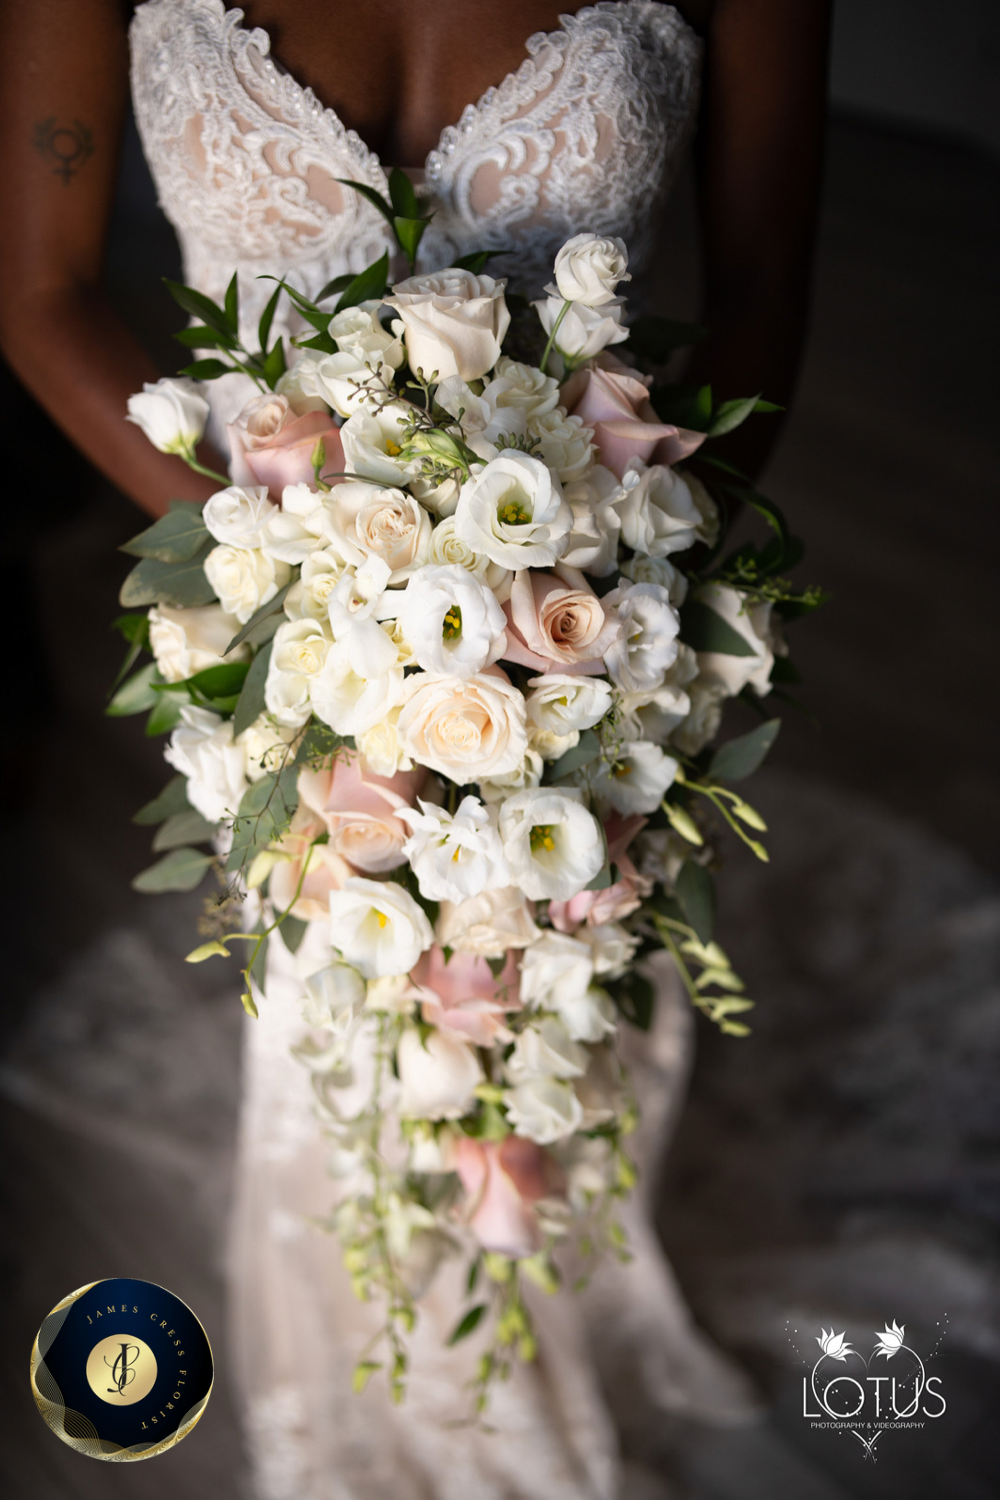 Image of wedding flowers, a new bride in a beautiful dress is holding her stunning white bridal bouquet.